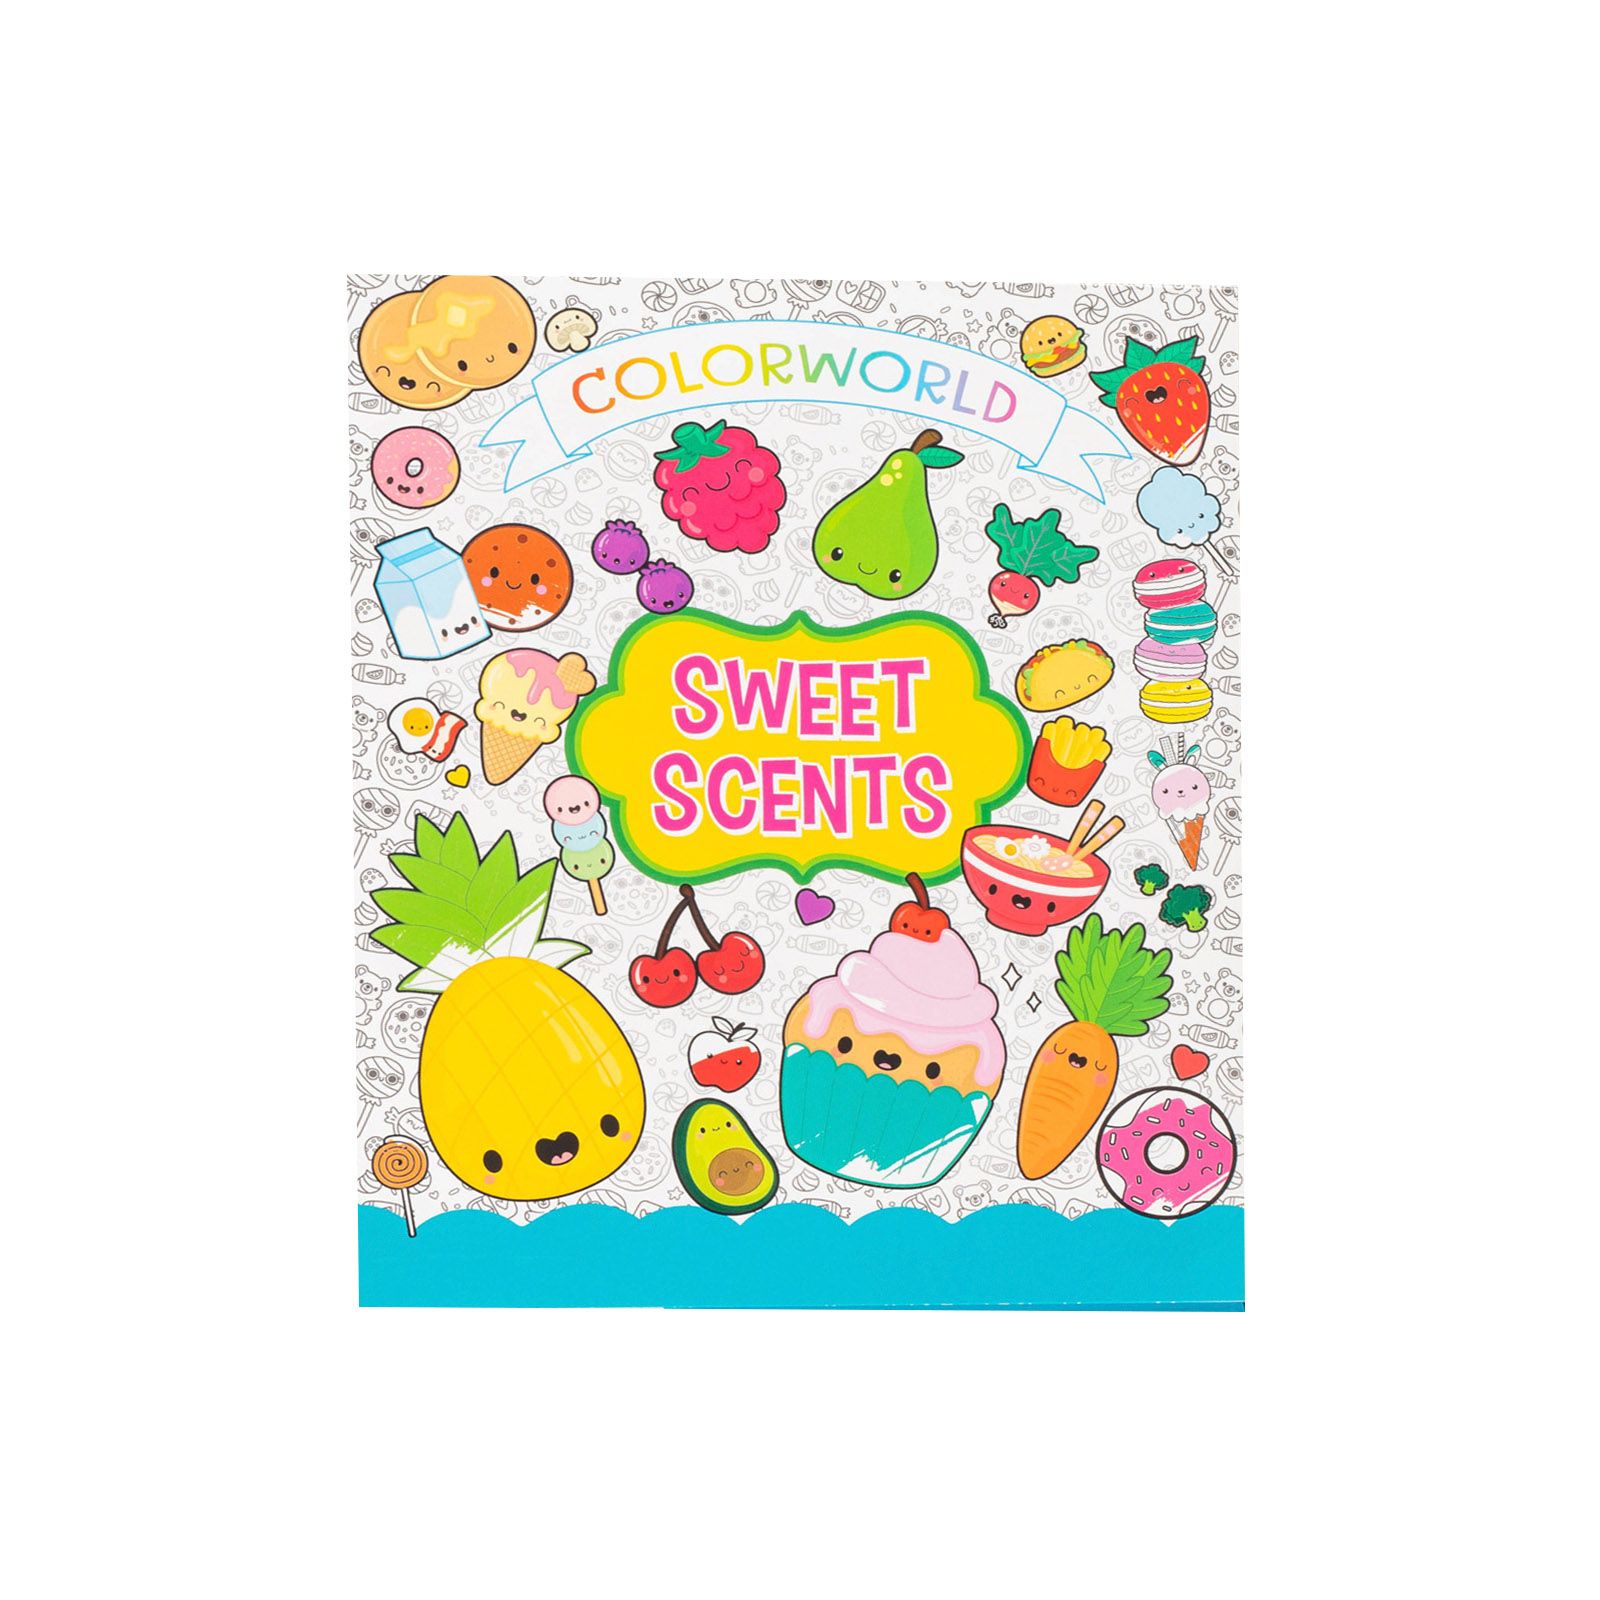 ColorWorld: Sweet Scents